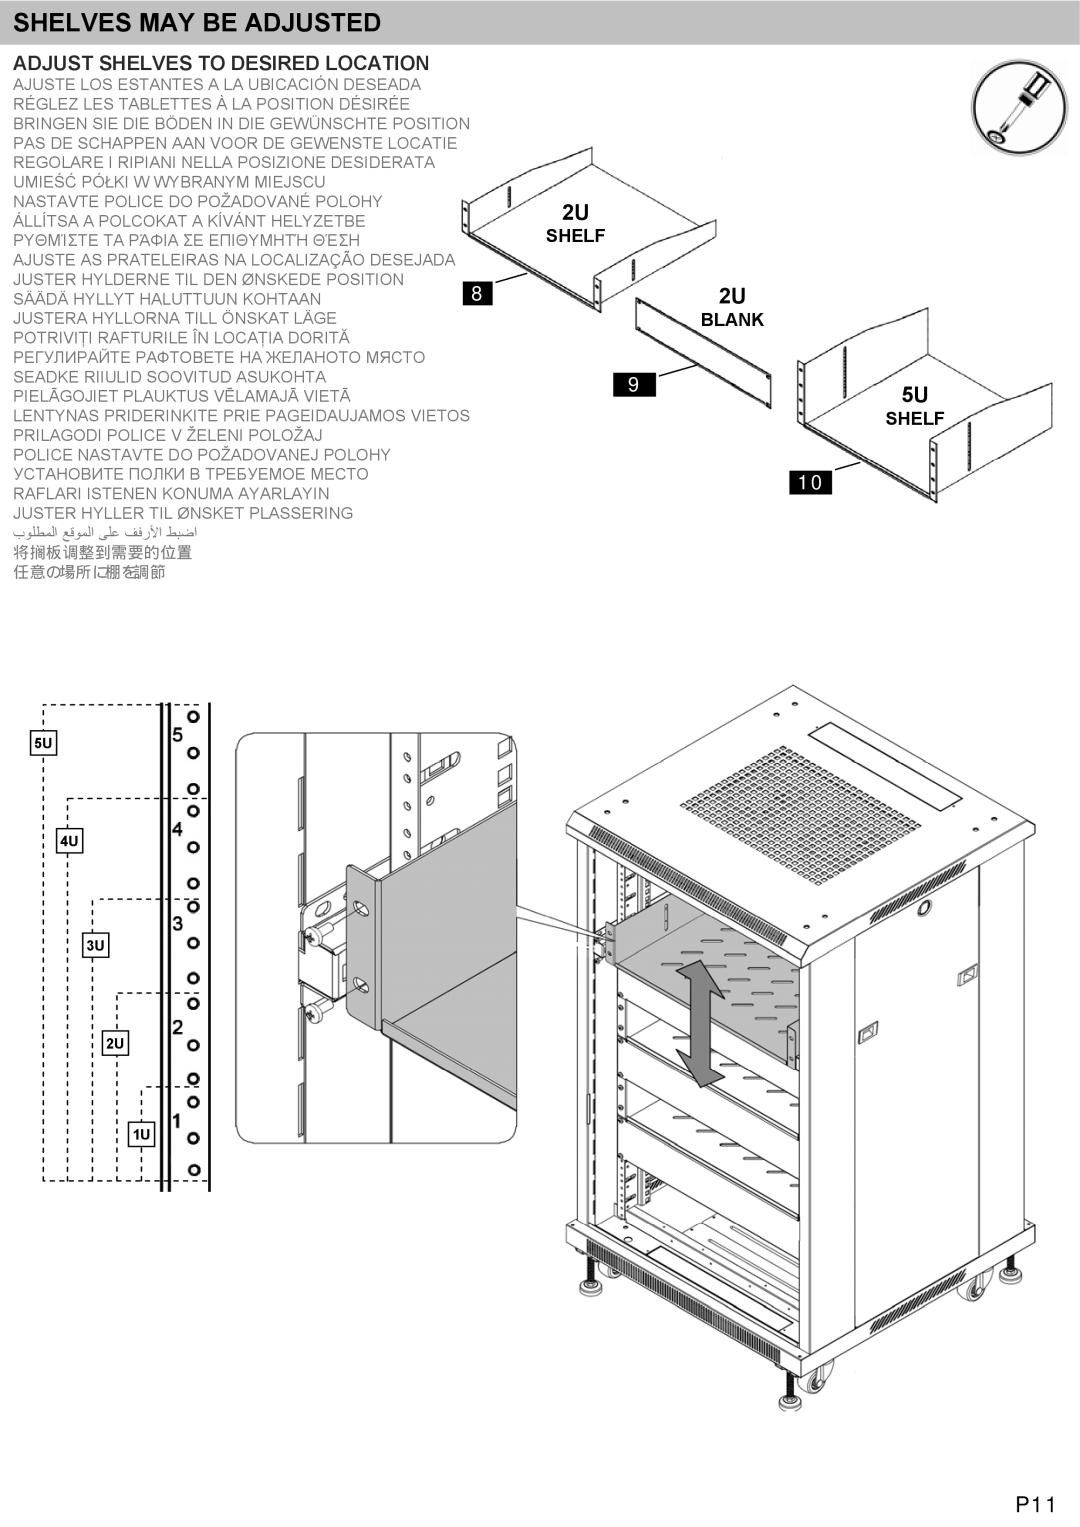 Omnimount RE27B instruction manual Shelves May Be Adjusted, Adjust Shelves To Desired Location, 将搁板调整到需要的位置 任意の場所に棚を調節 